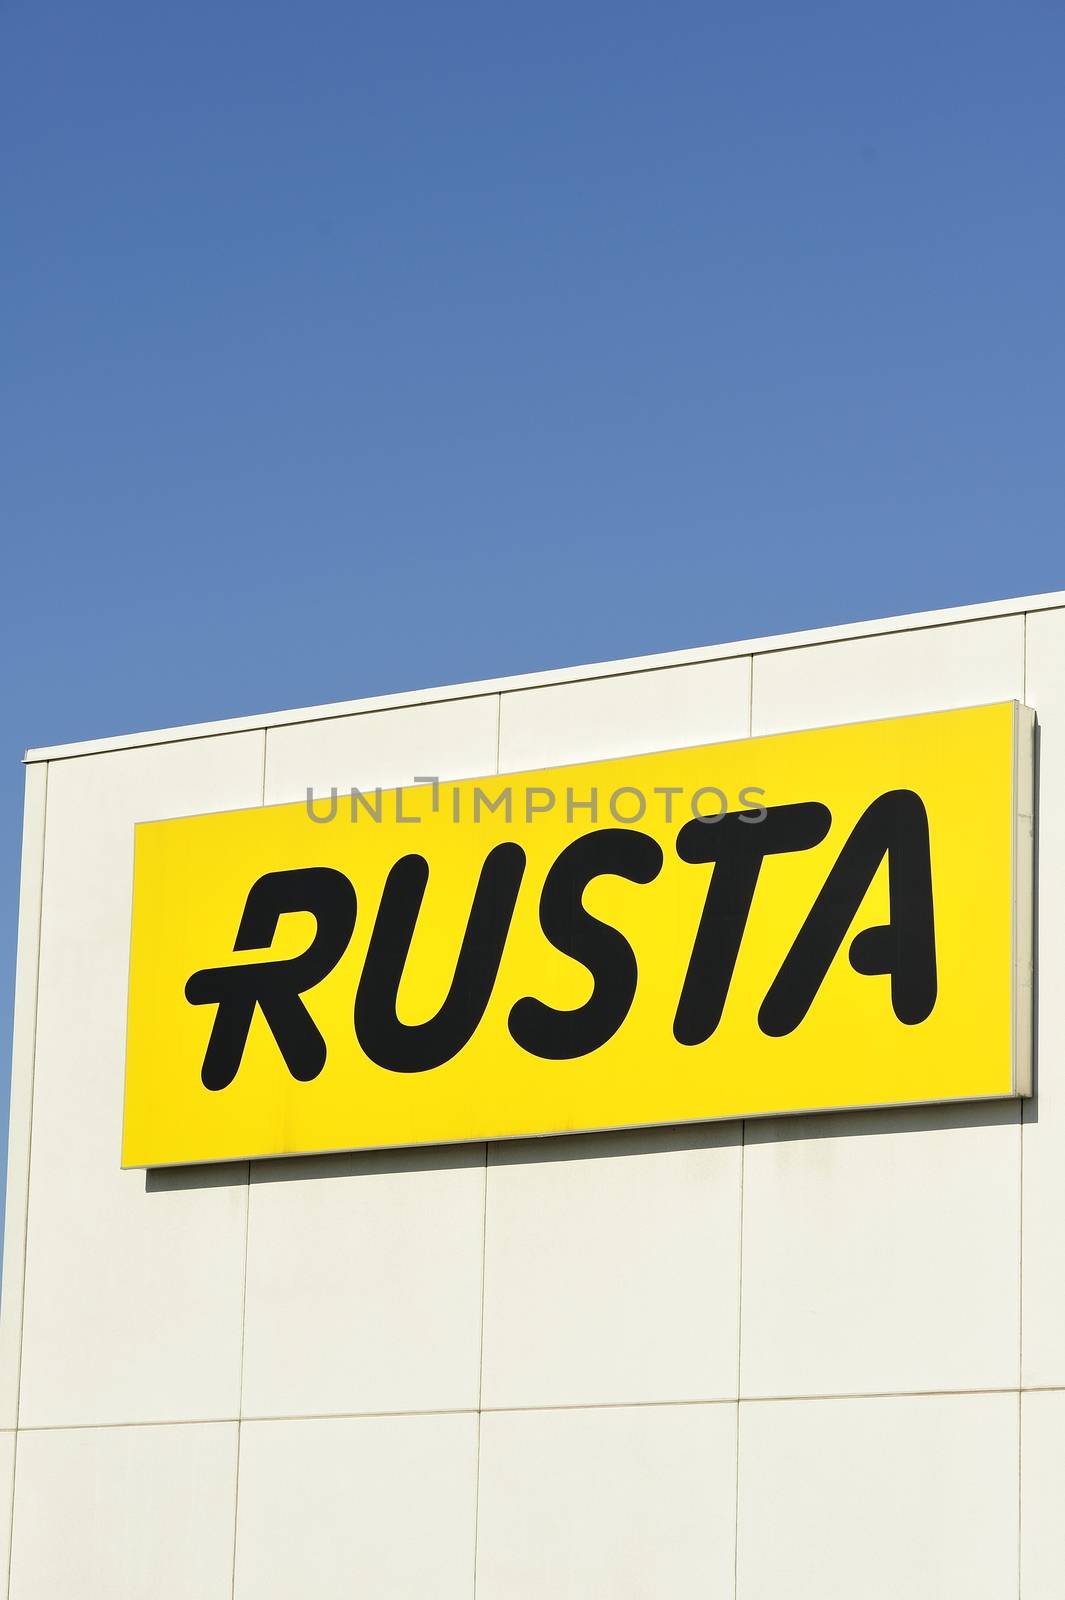 STOCKHOLM - MAY 1 2013: Rusta logo sign on showroom premises photographed on may 1th 2013 in Stockholm, Sweden.